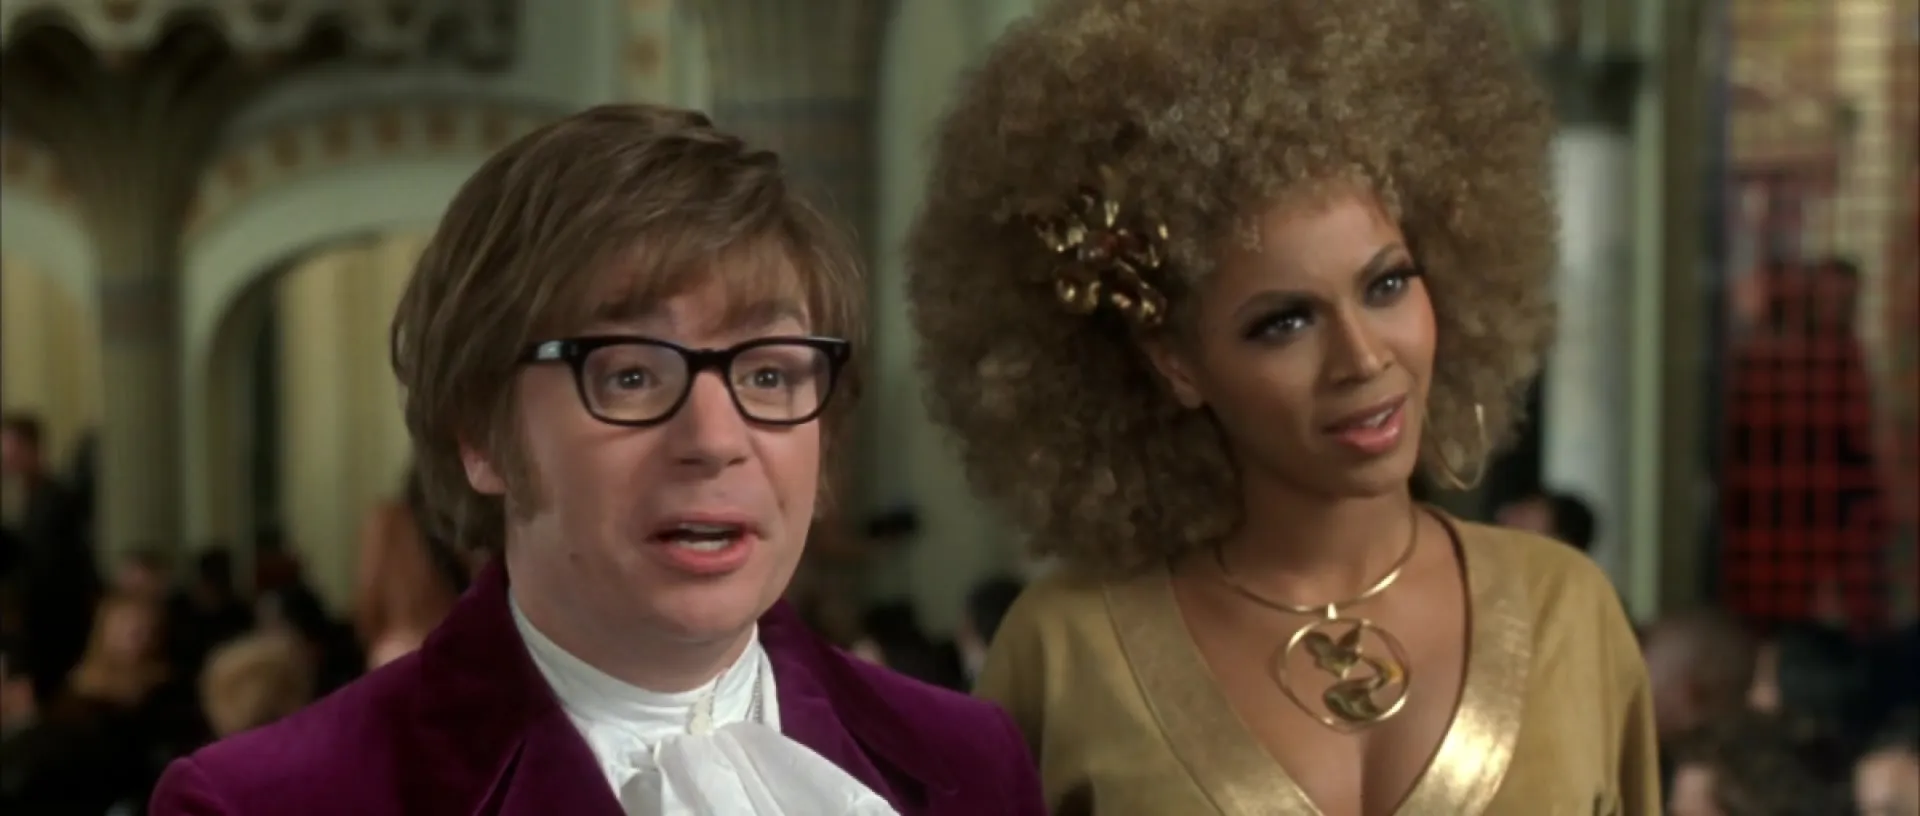 Austin Powers (Mike Myers) and Foxxy Cleopatra (Beyoncé Knowles-Carter) in 'Austin Powers in Goldmember.'